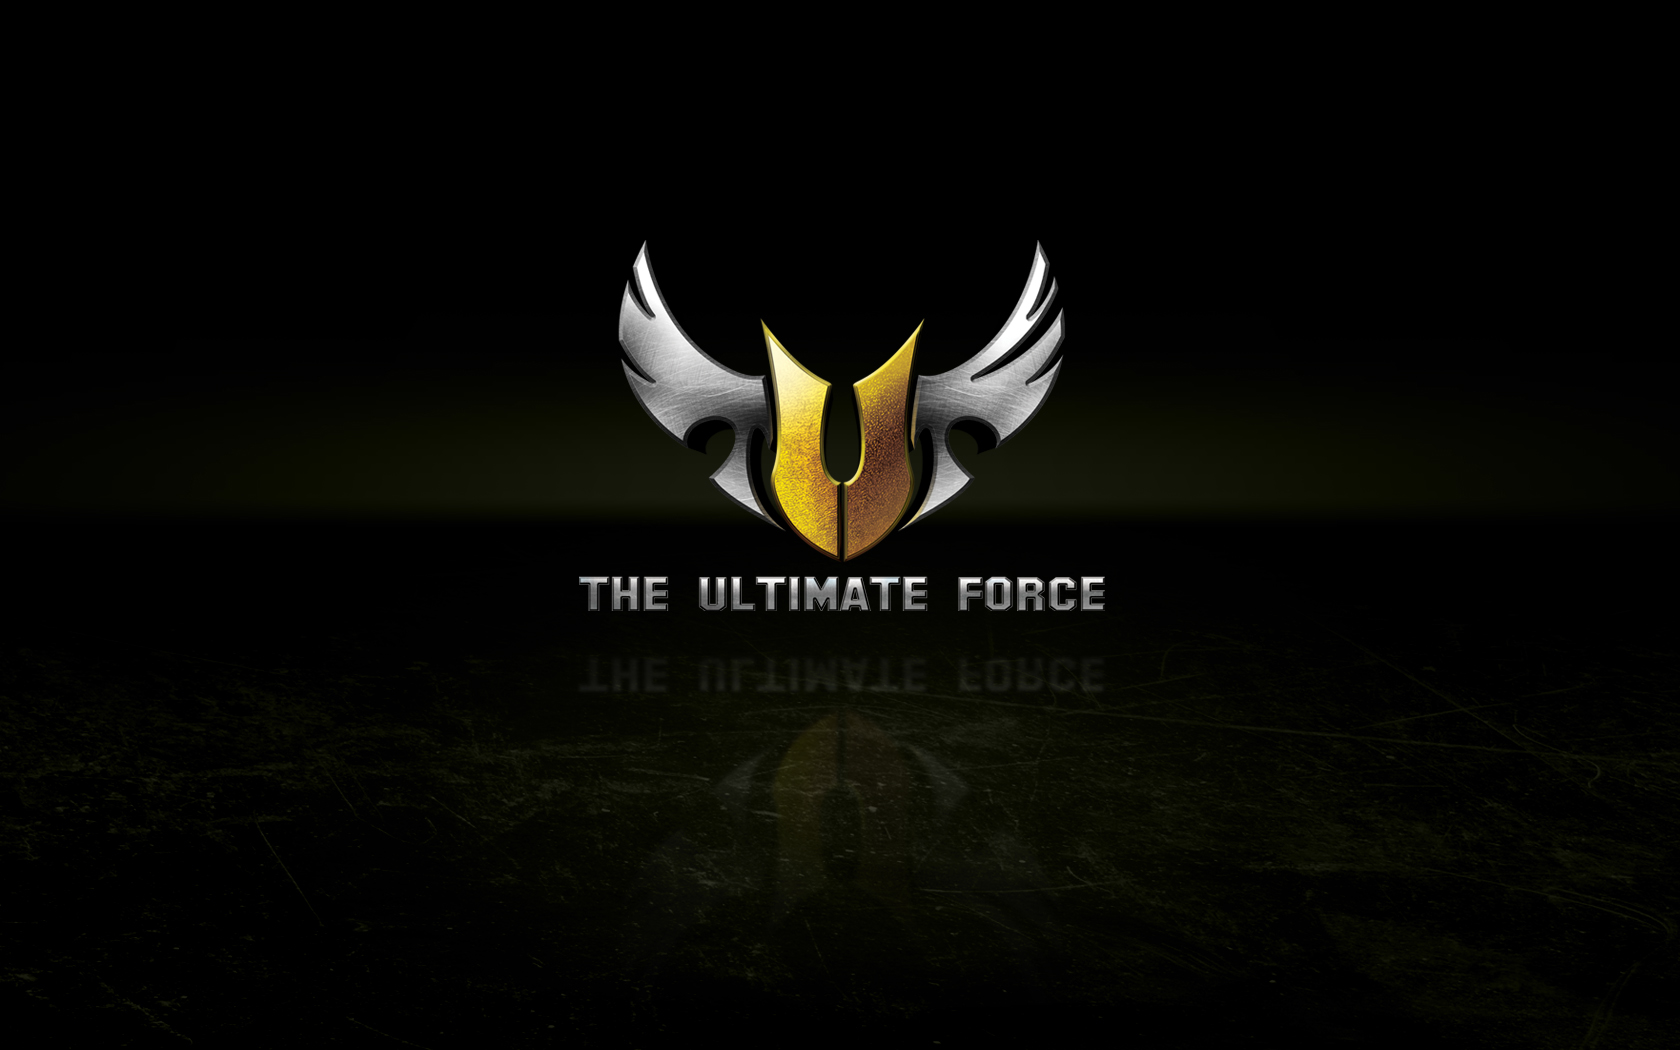 Wallpaper | Downloads | THE ULTIMATE FORCE